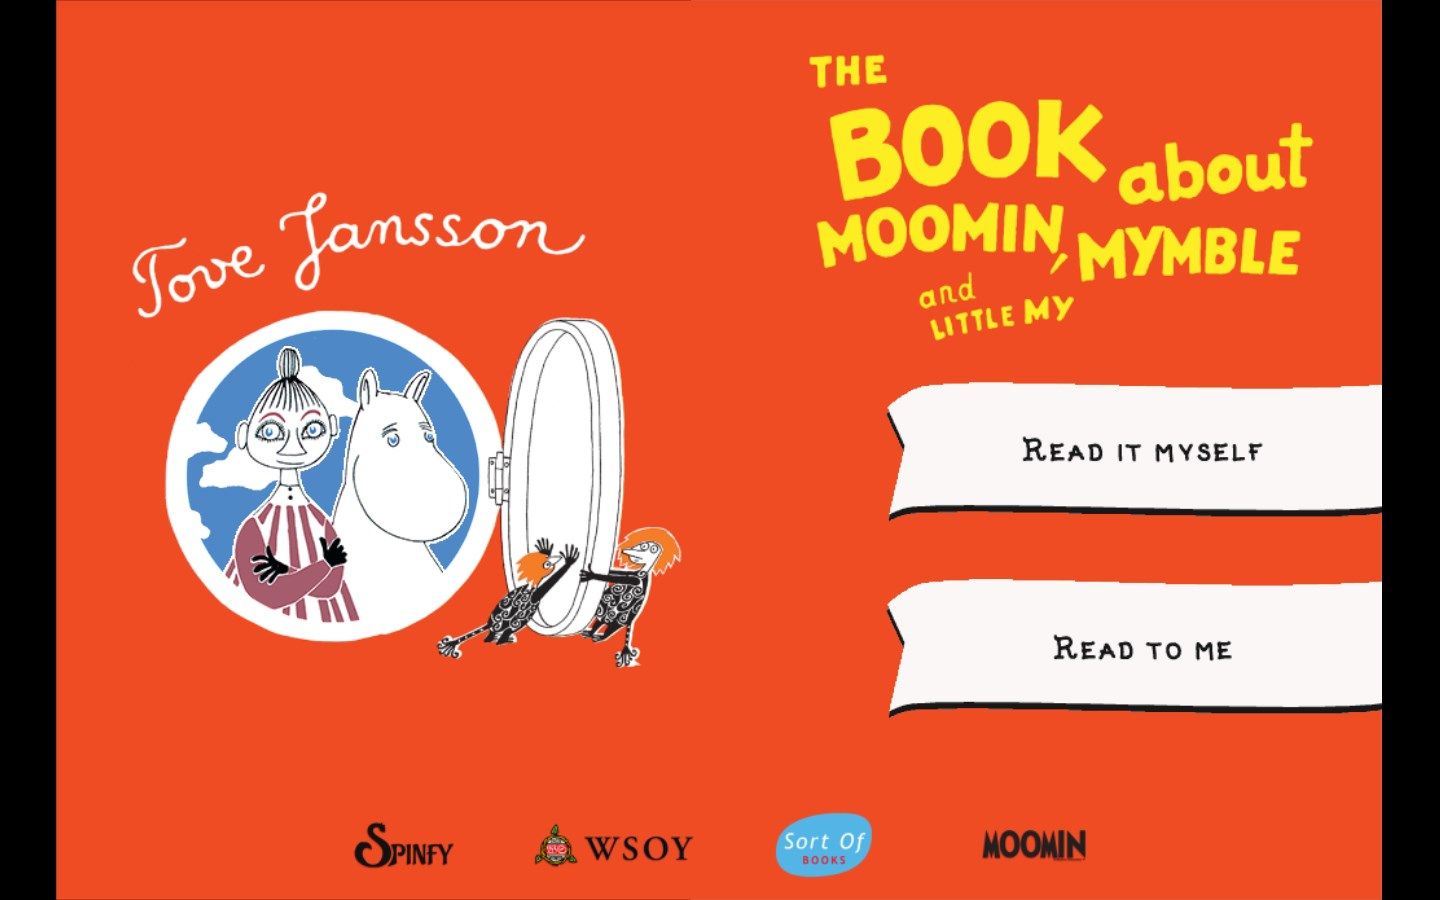 Moomin, Mymble and Little My